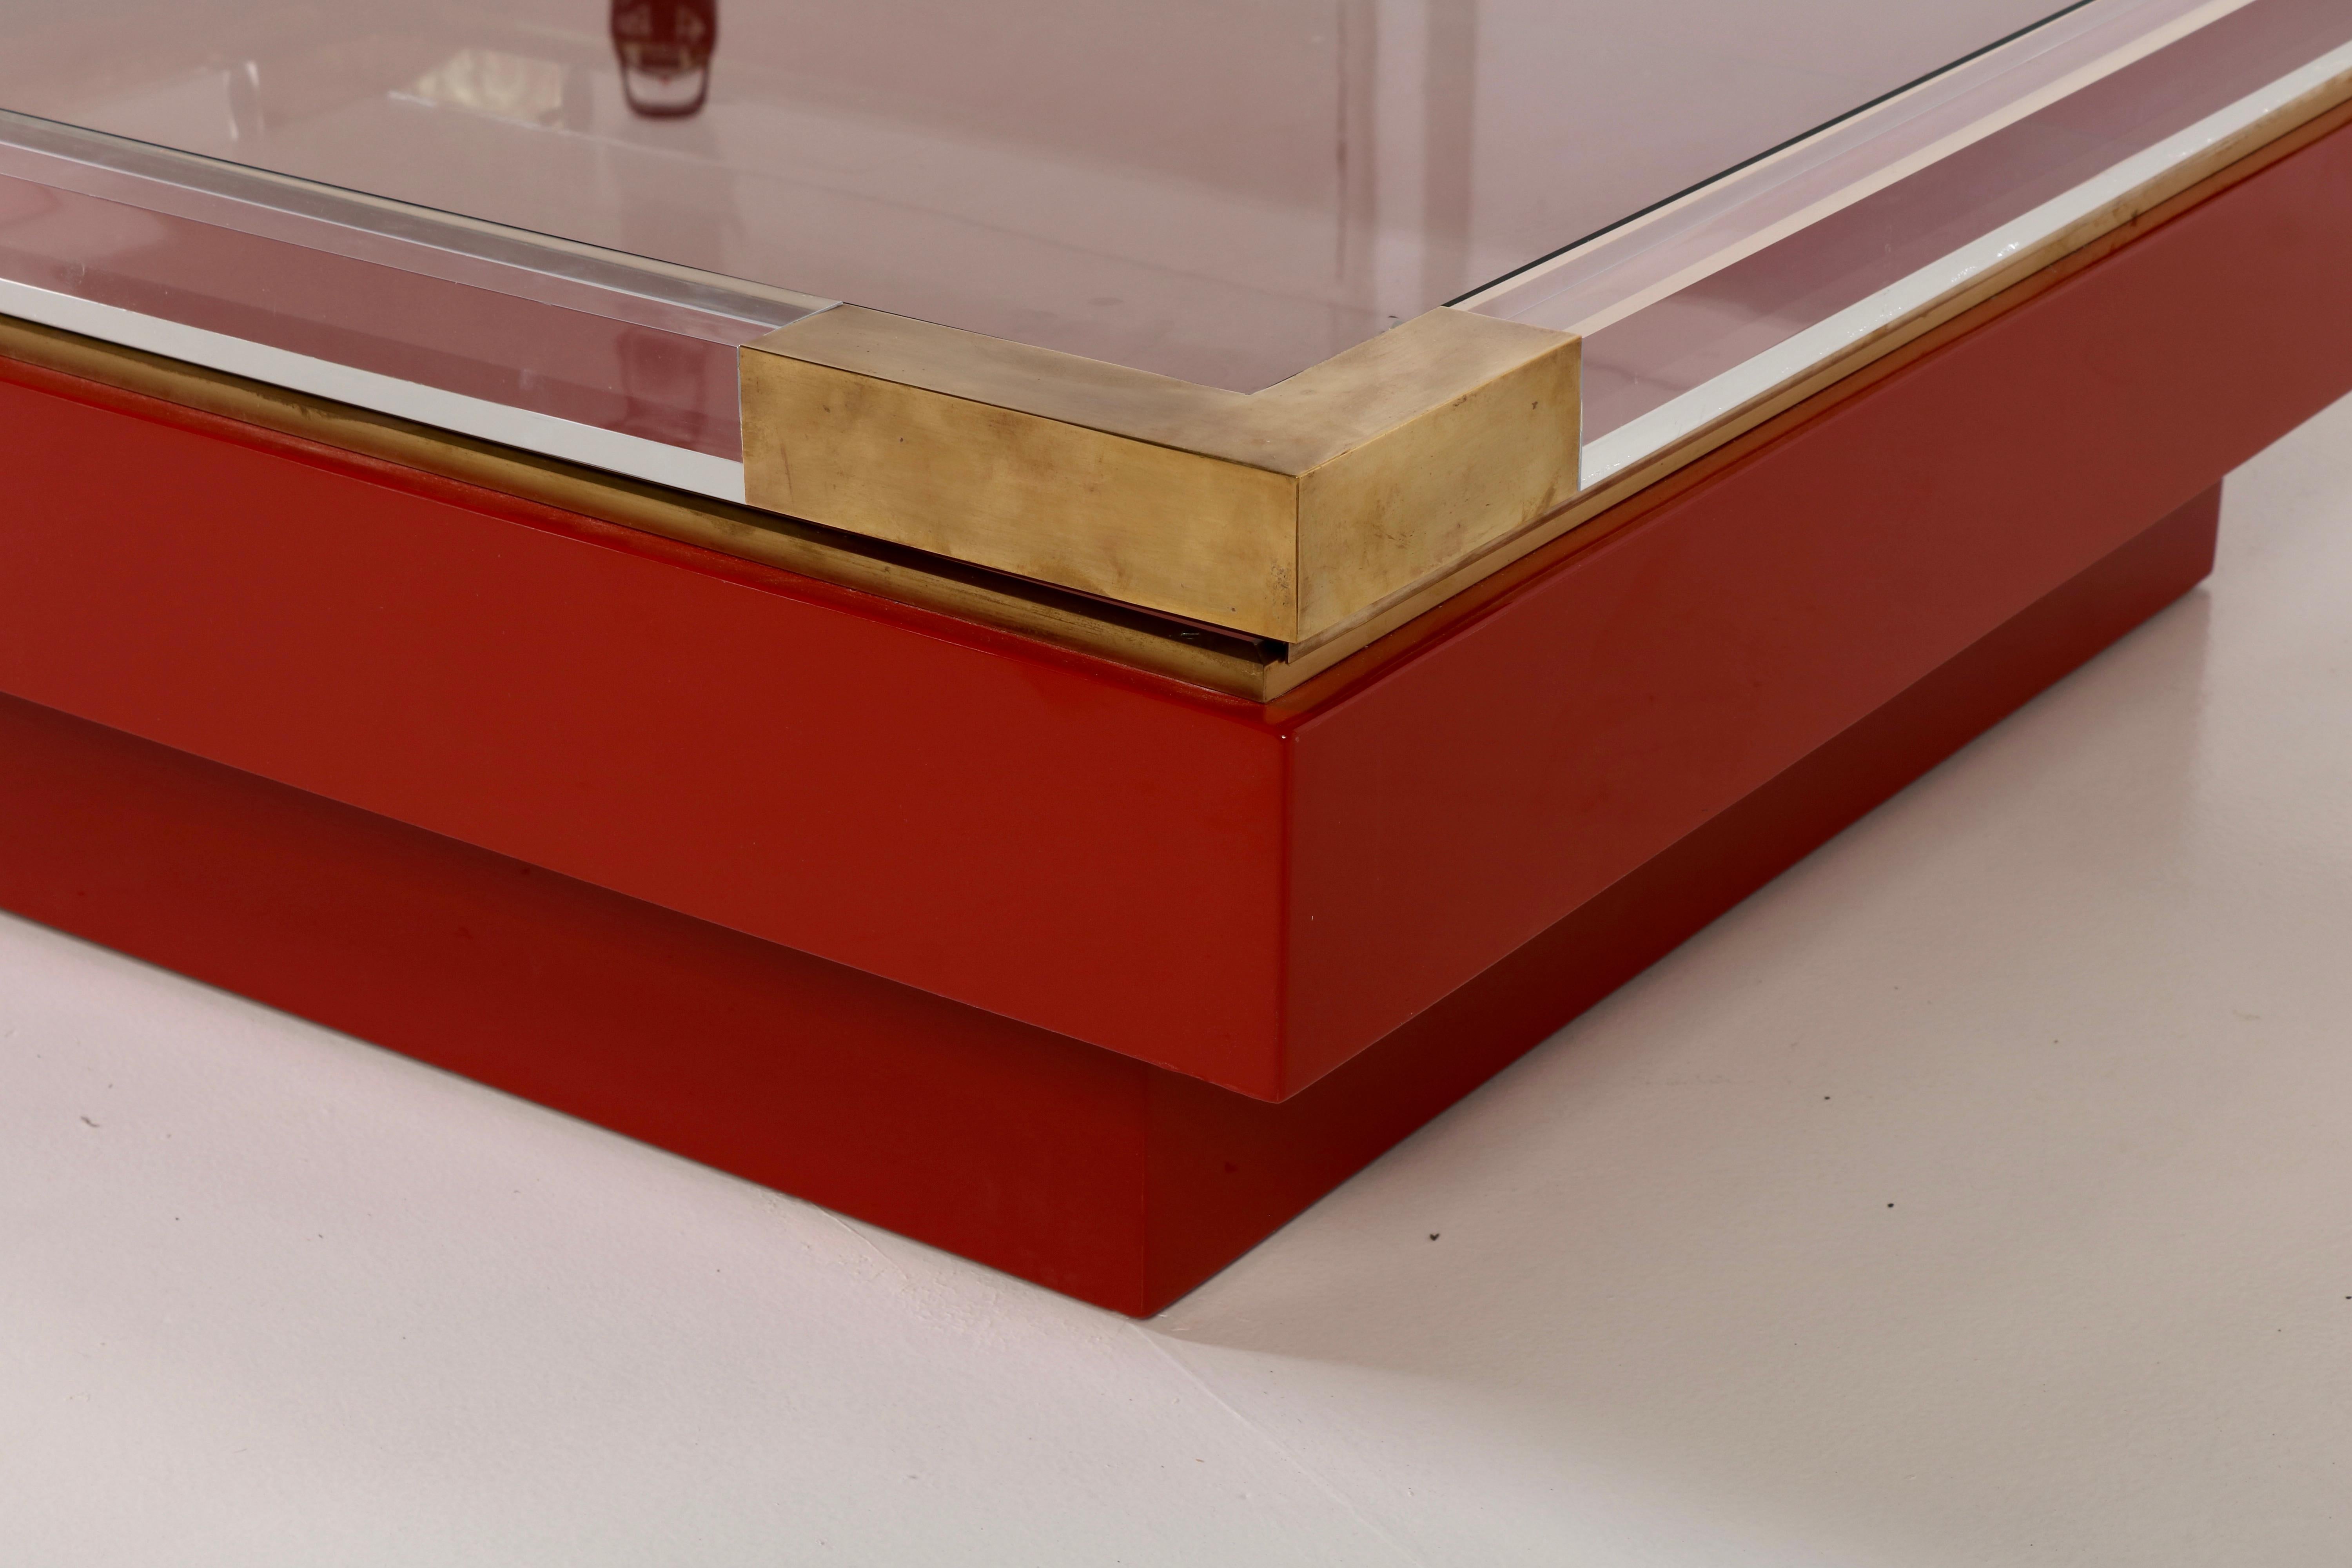 Stunning Sliding Top Low Table in Red and Gold by Romeo Rega, Italian Design 70s For Sale 3